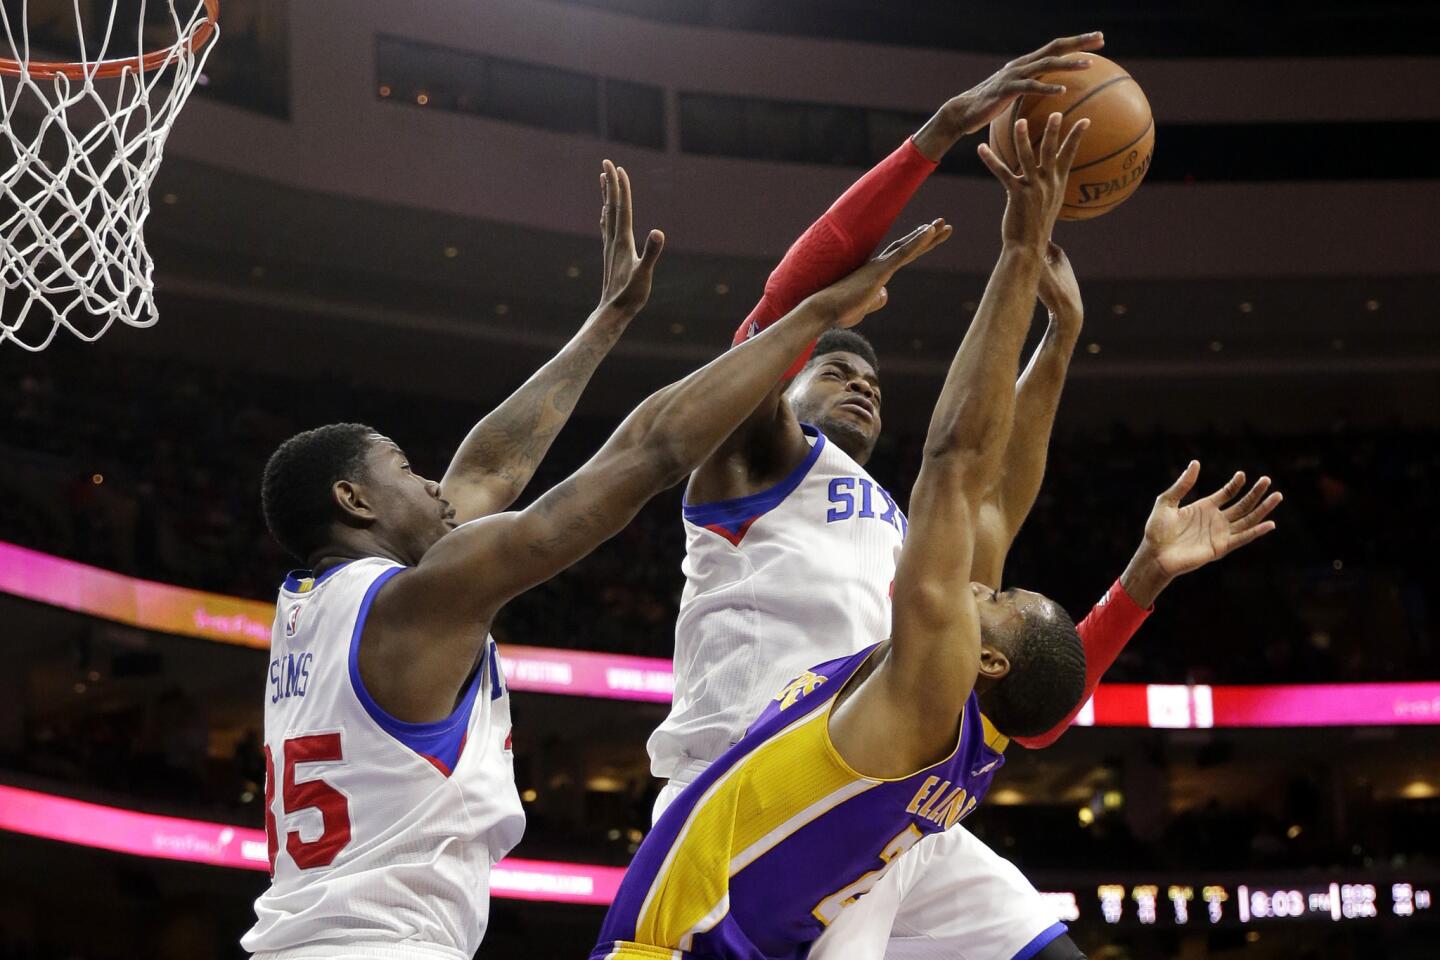 Lakers shooting guard Wayne Ellington gets his shot rejected by 76ers center Nerlens Noel, middle, while center Henry Sims, 35, is also there to try to block the shot.